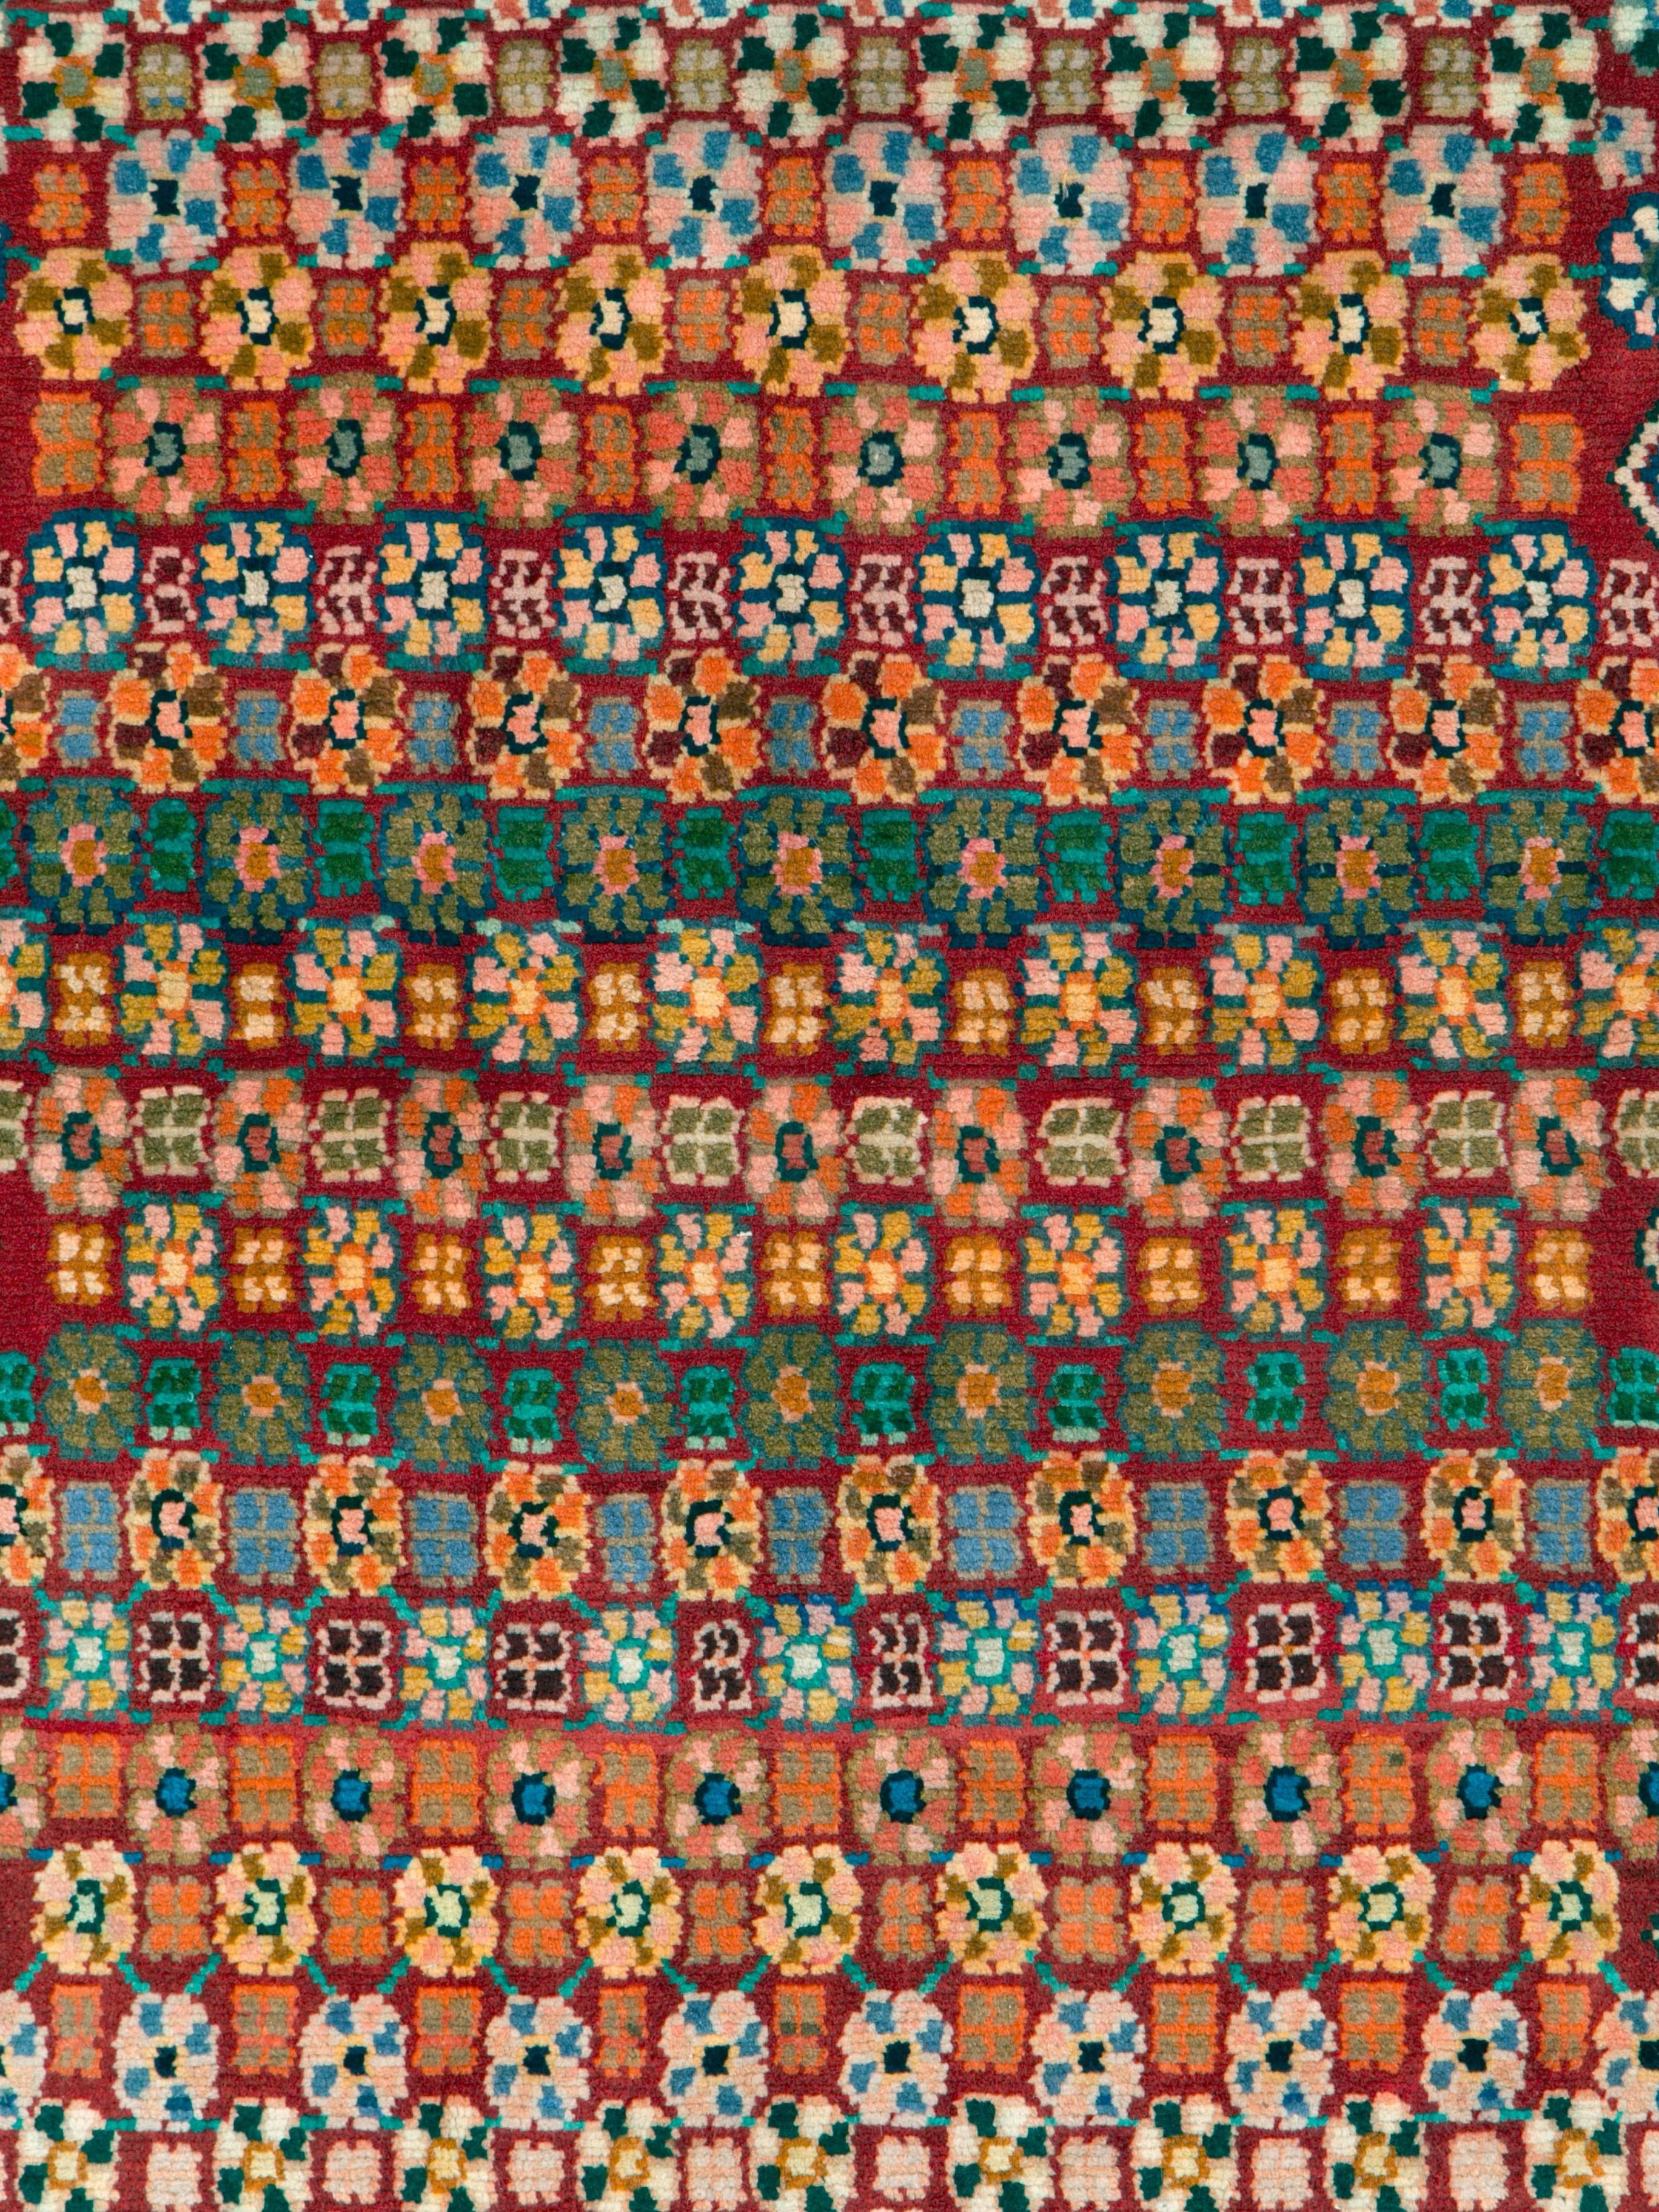 A vintage Persian Kashan rug from the mid-20th century.